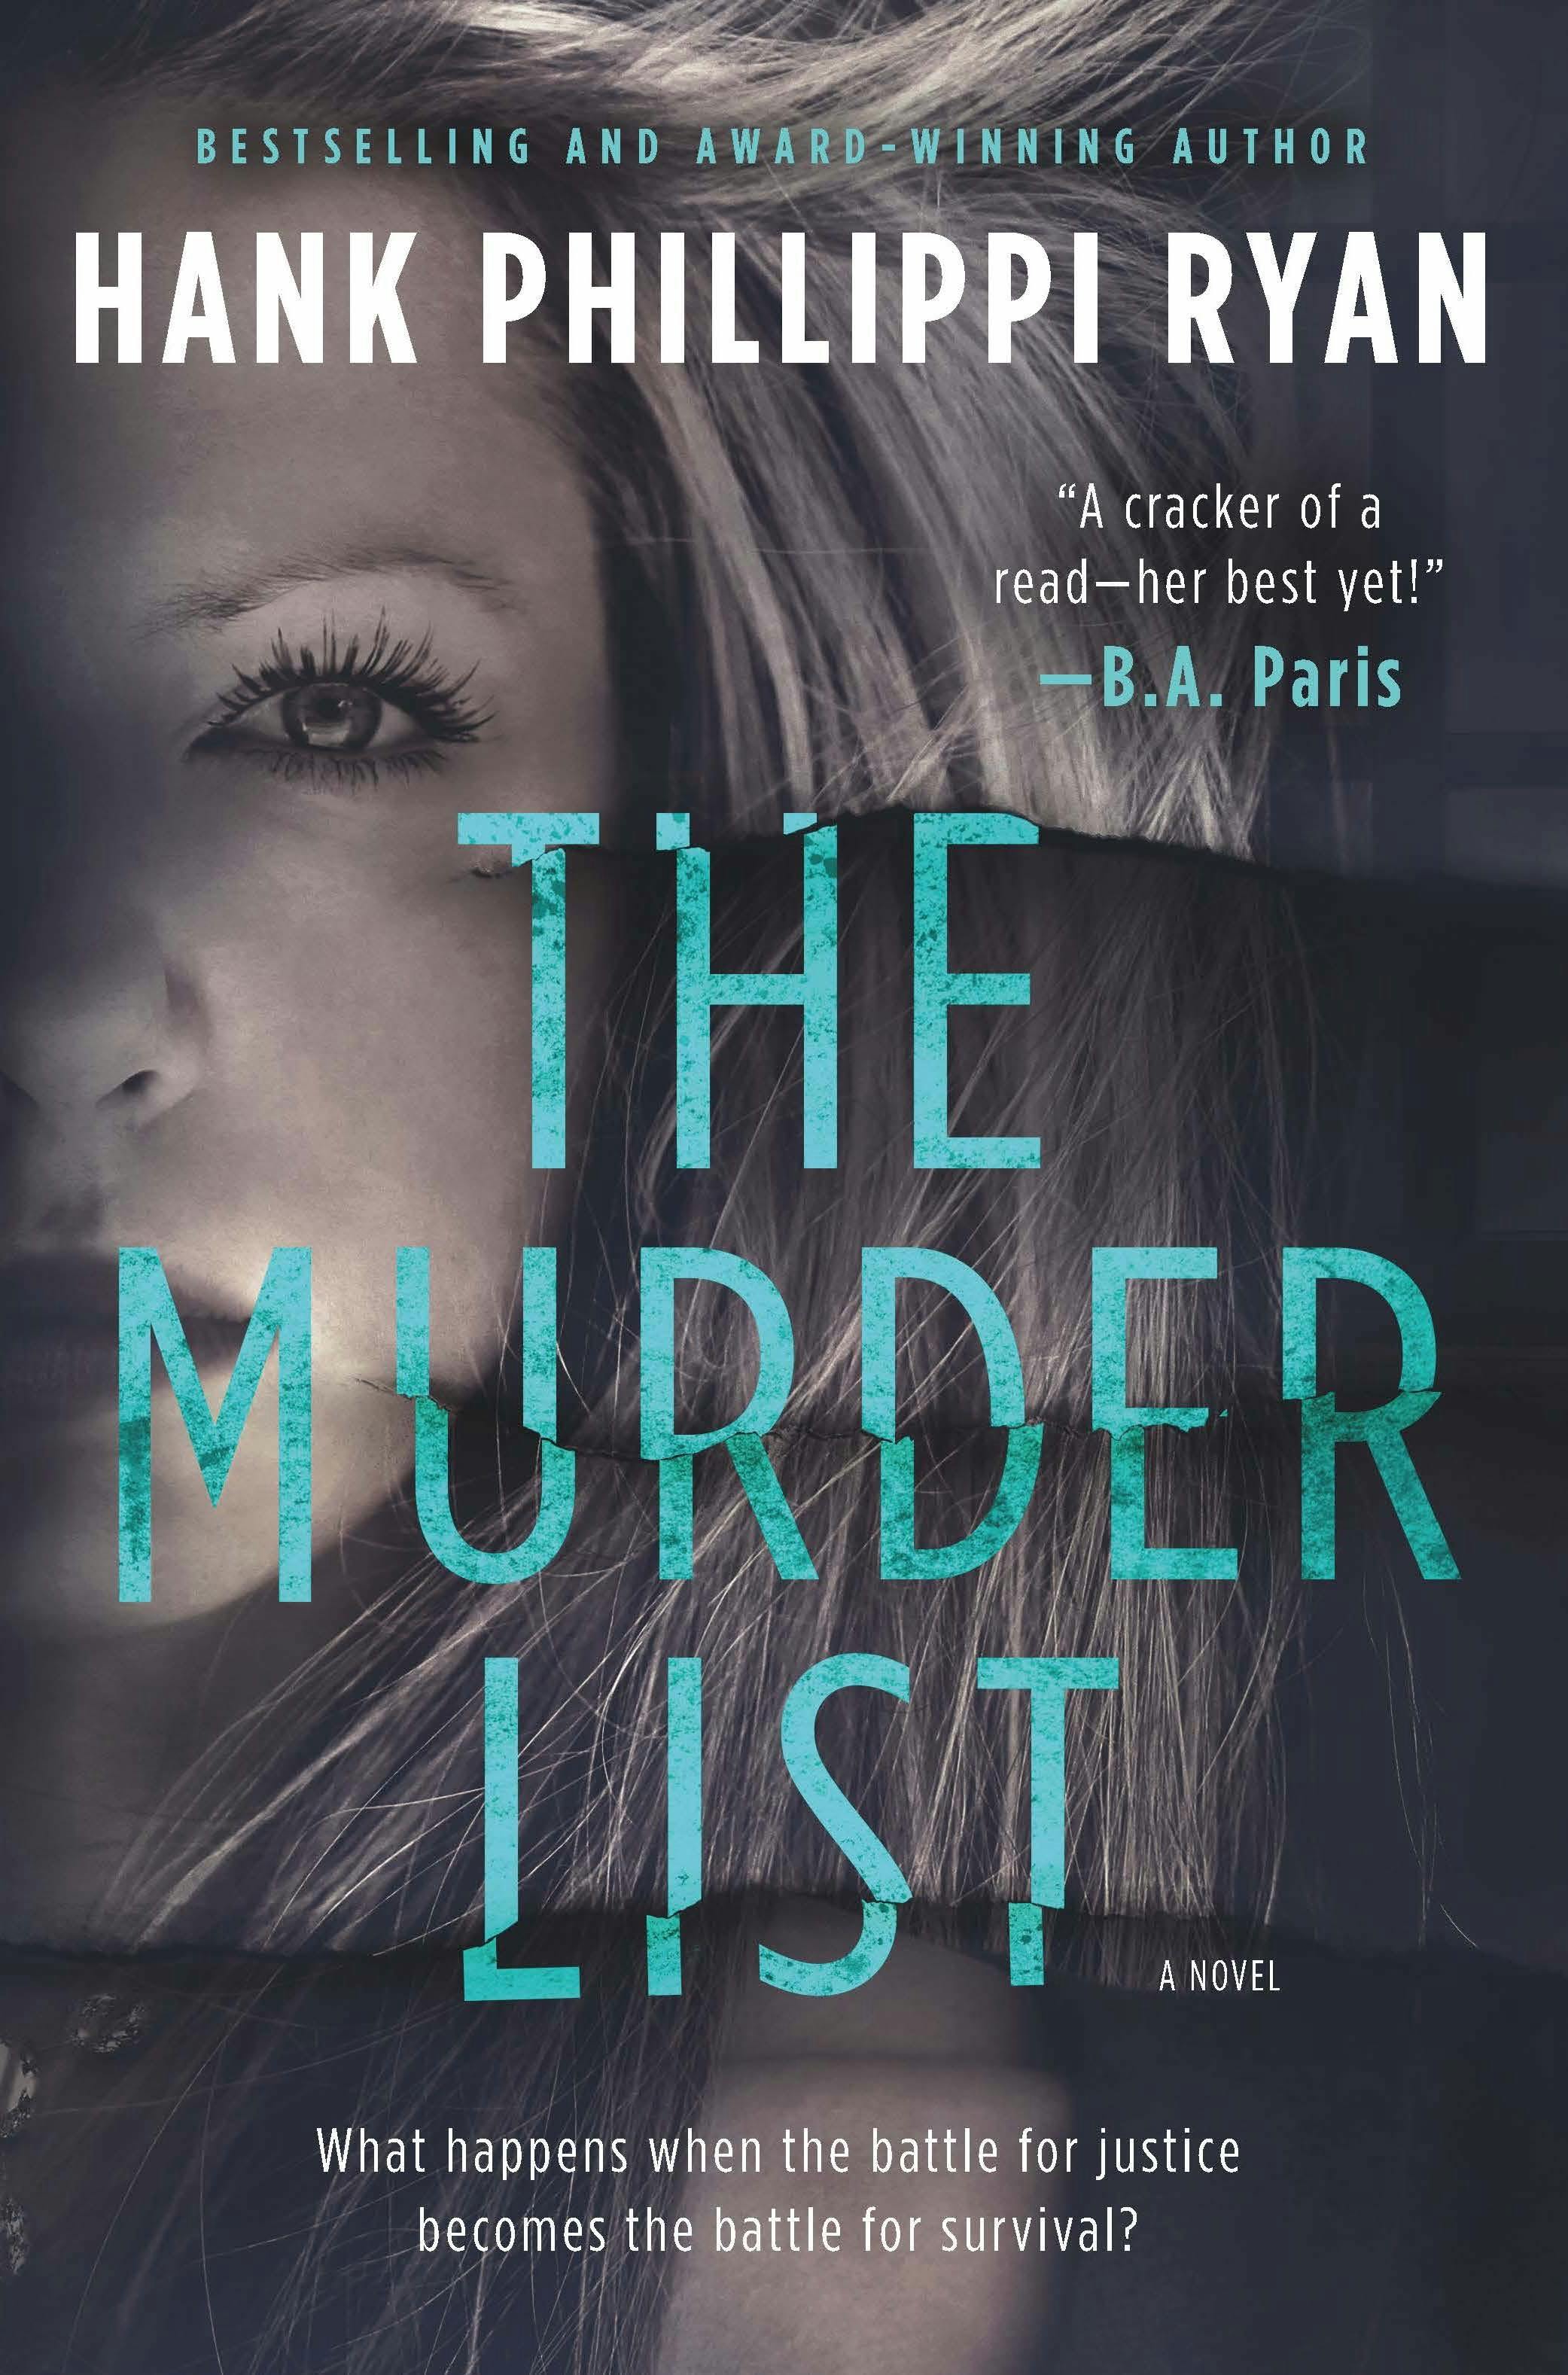 Cover for the book titled as: The Murder List